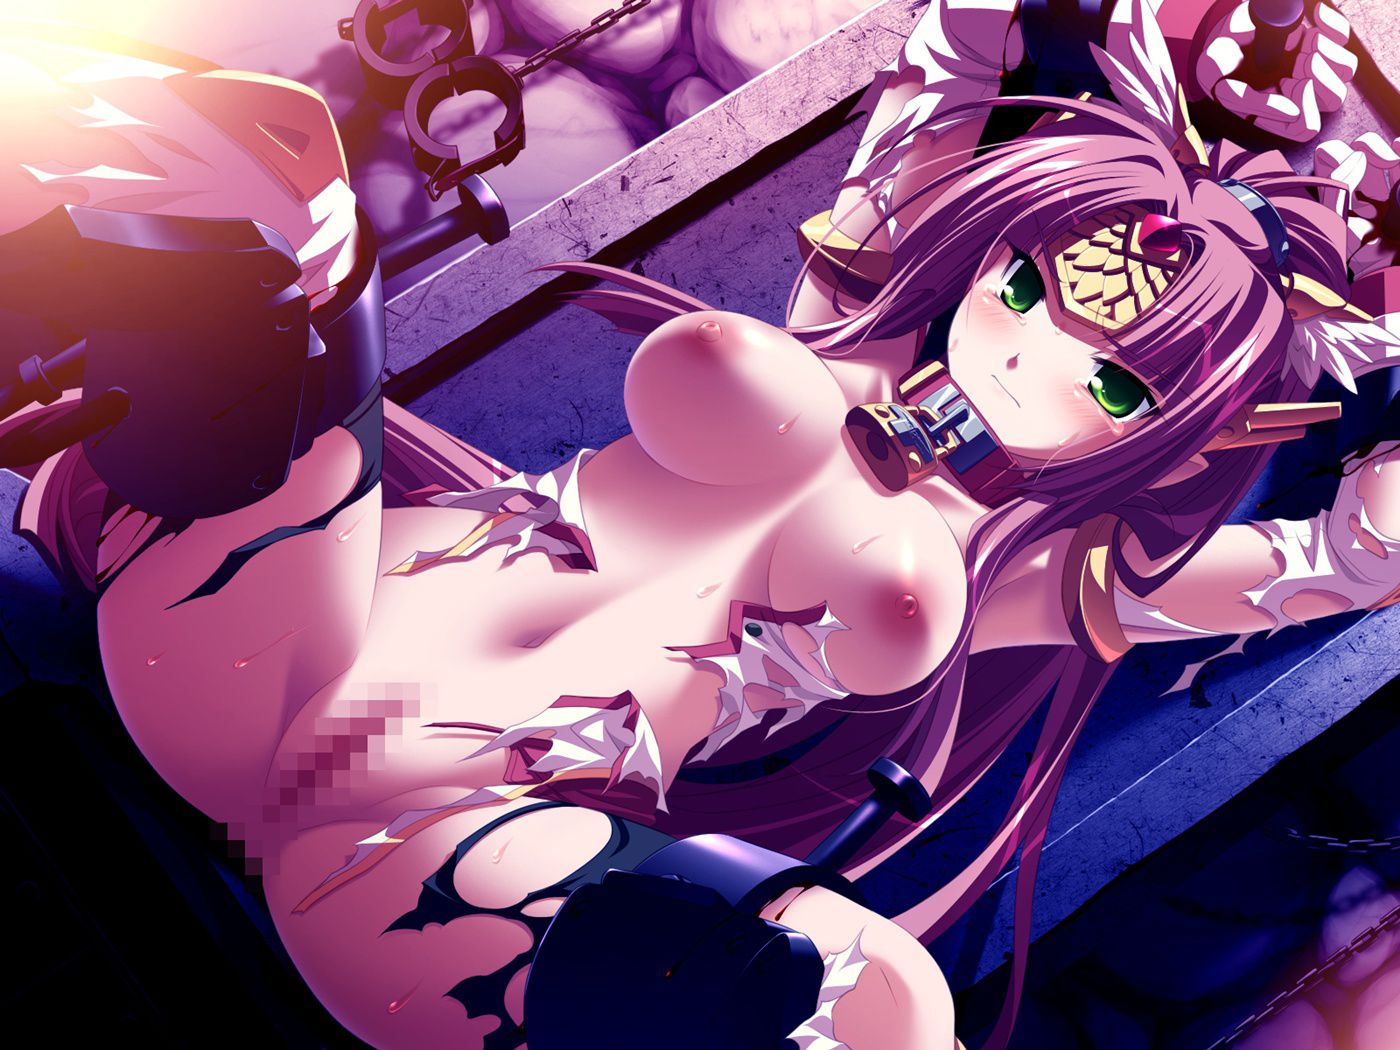 Steel flame Soleil - ChaosRegion-[18 PC Bishoujo game CG] erotic wallpapers and pictures part 1 5